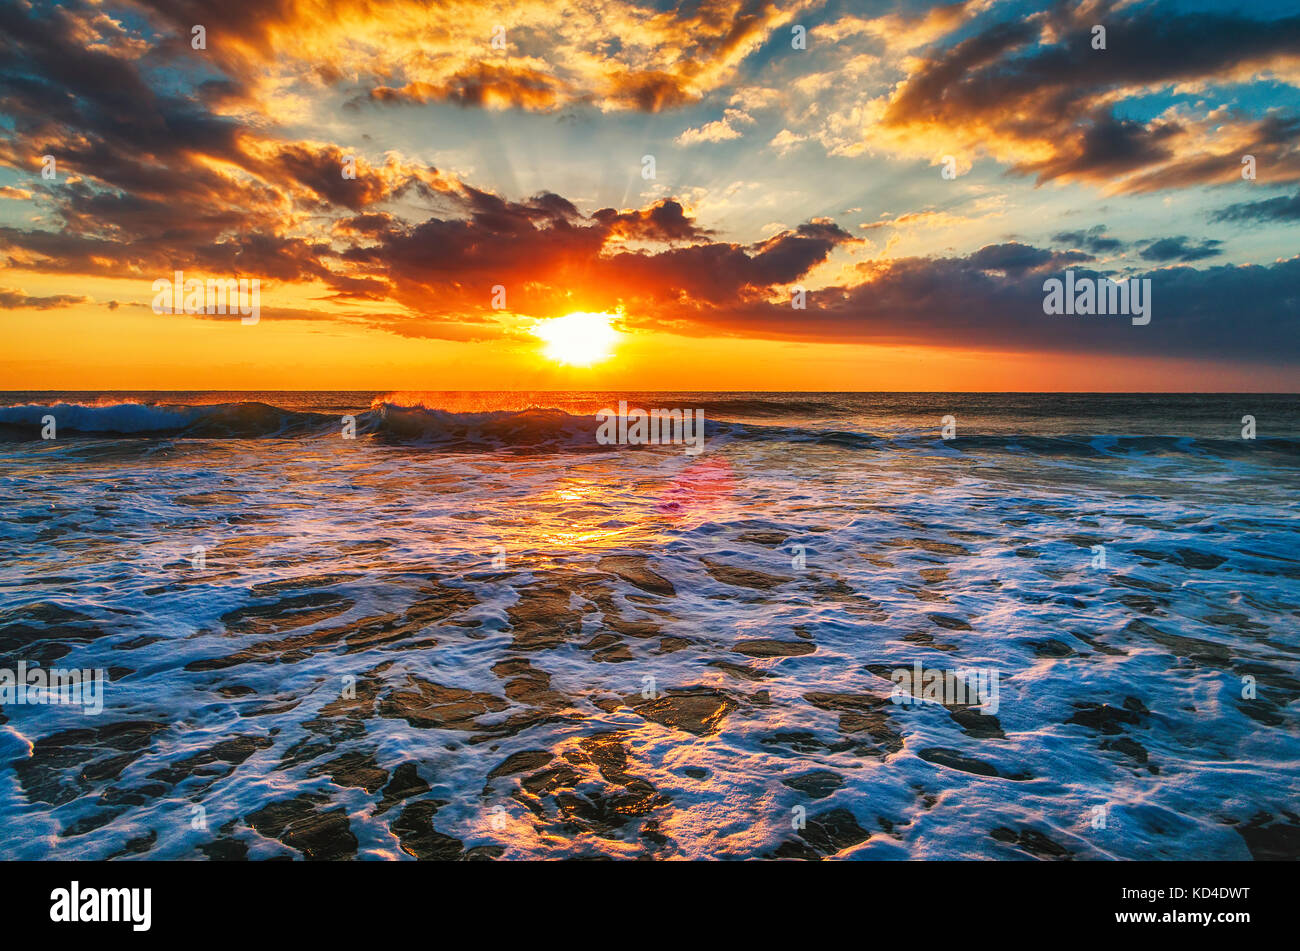 Aerial view over the sea, sunrise shot. Stock Photo